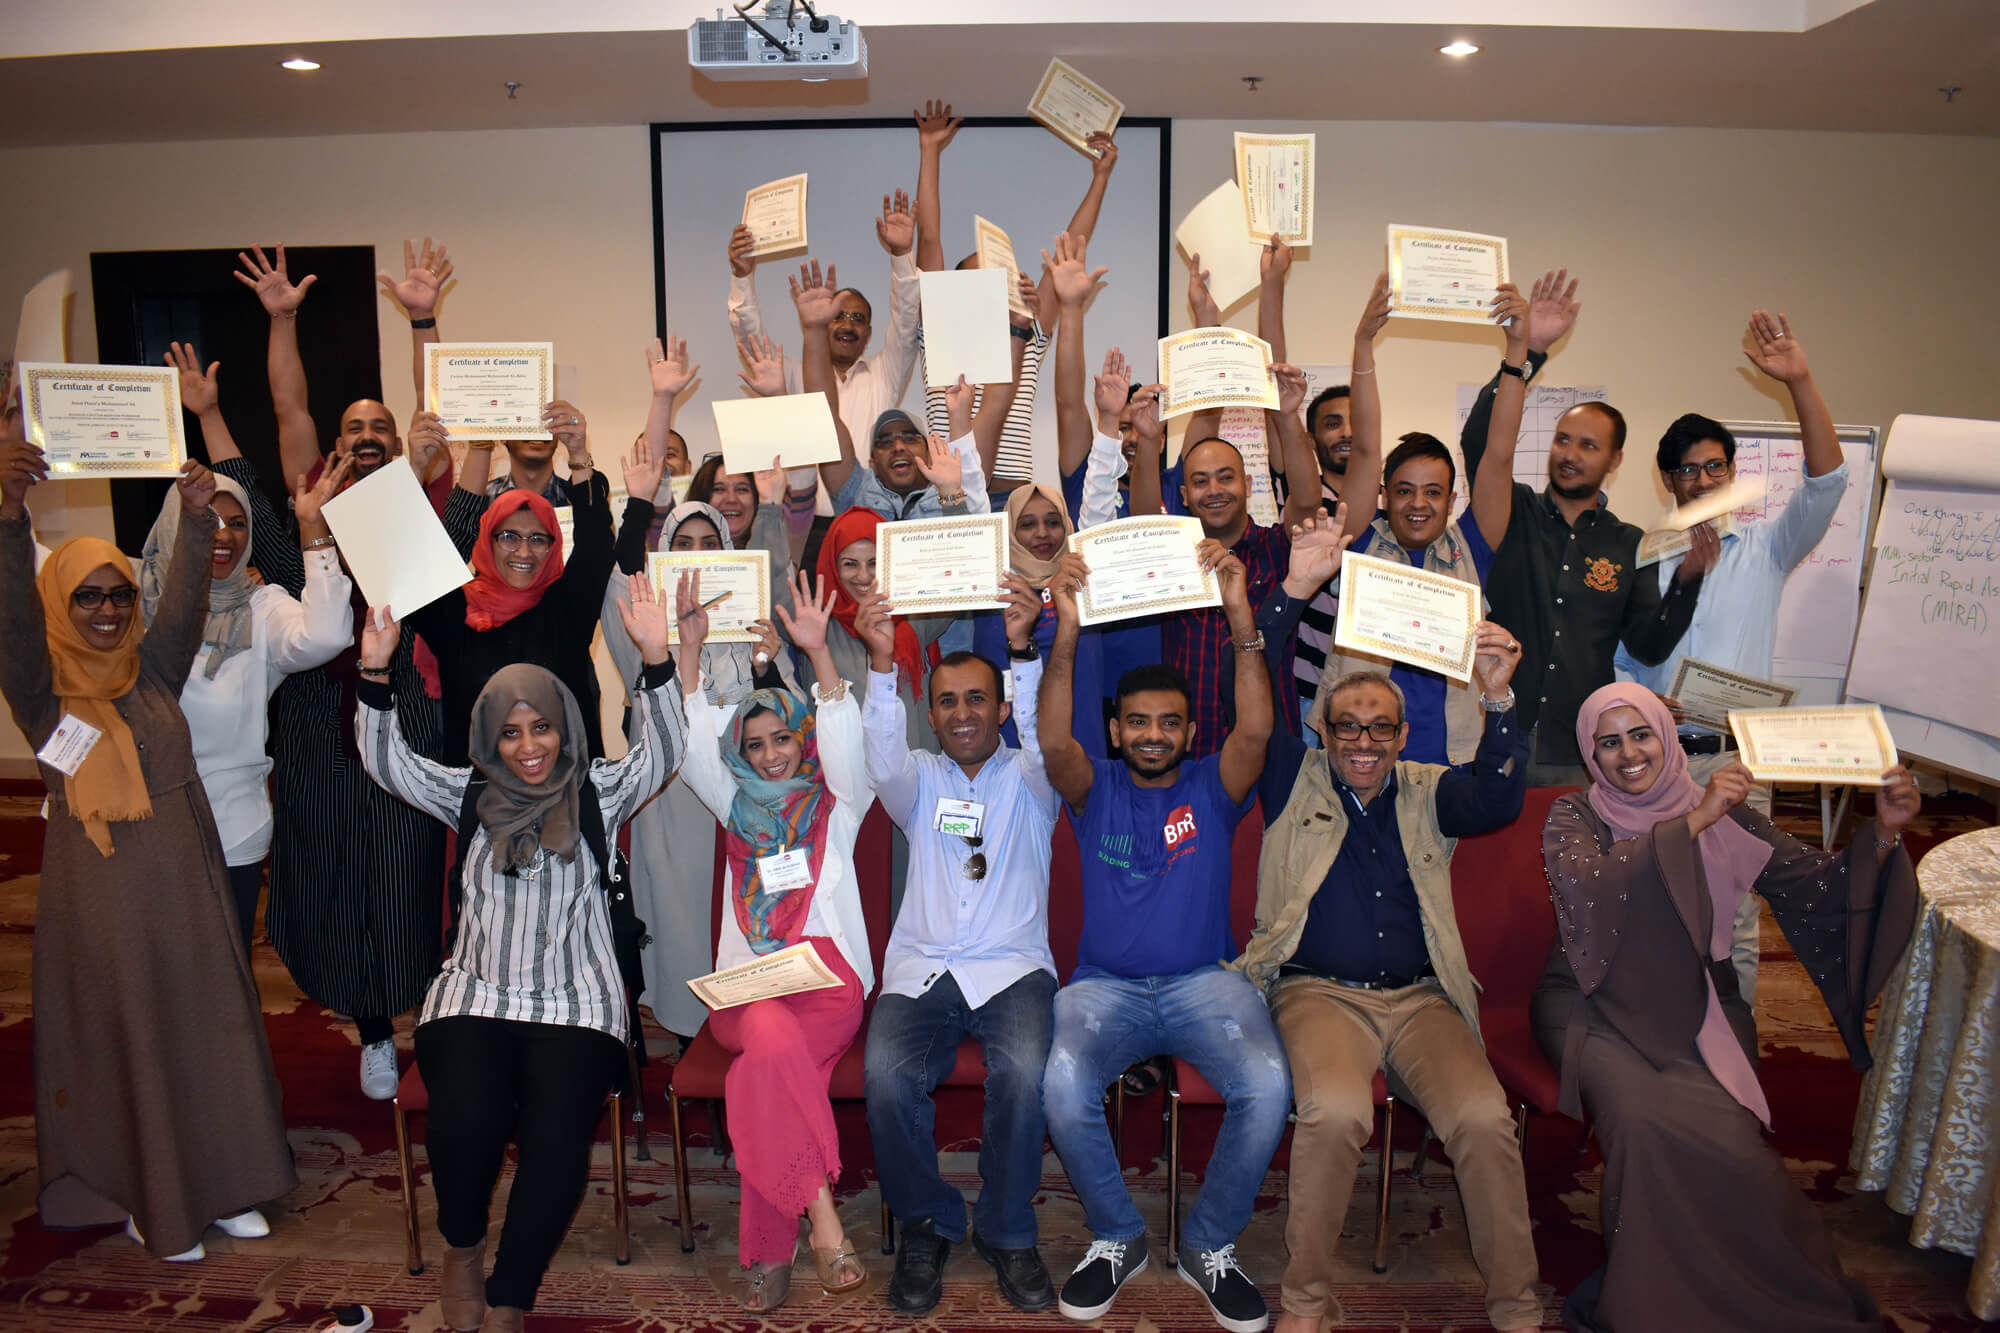 Participants at a BBR workshop in Jordan receive their certificates of completion on the meeting’s final day.